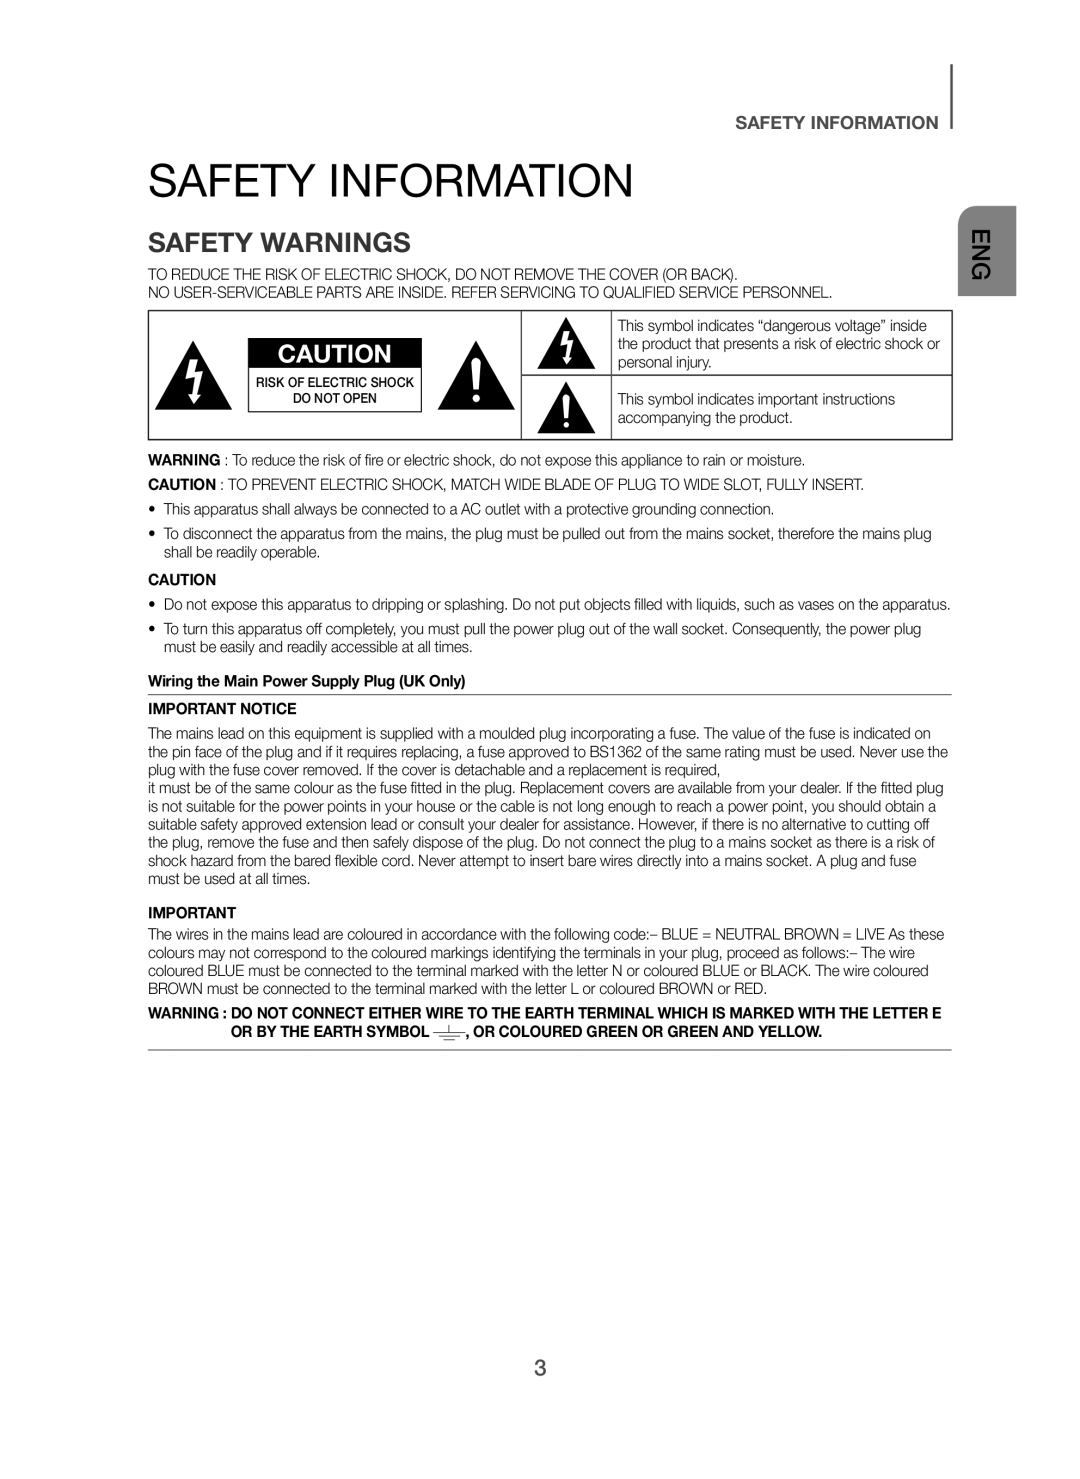 Samsung HW-H450/XN, HW-H450/TK, HW-H450/EN, HW-H450/ZF, HW-H450/XE manual Safety Information, Safety Warnings 